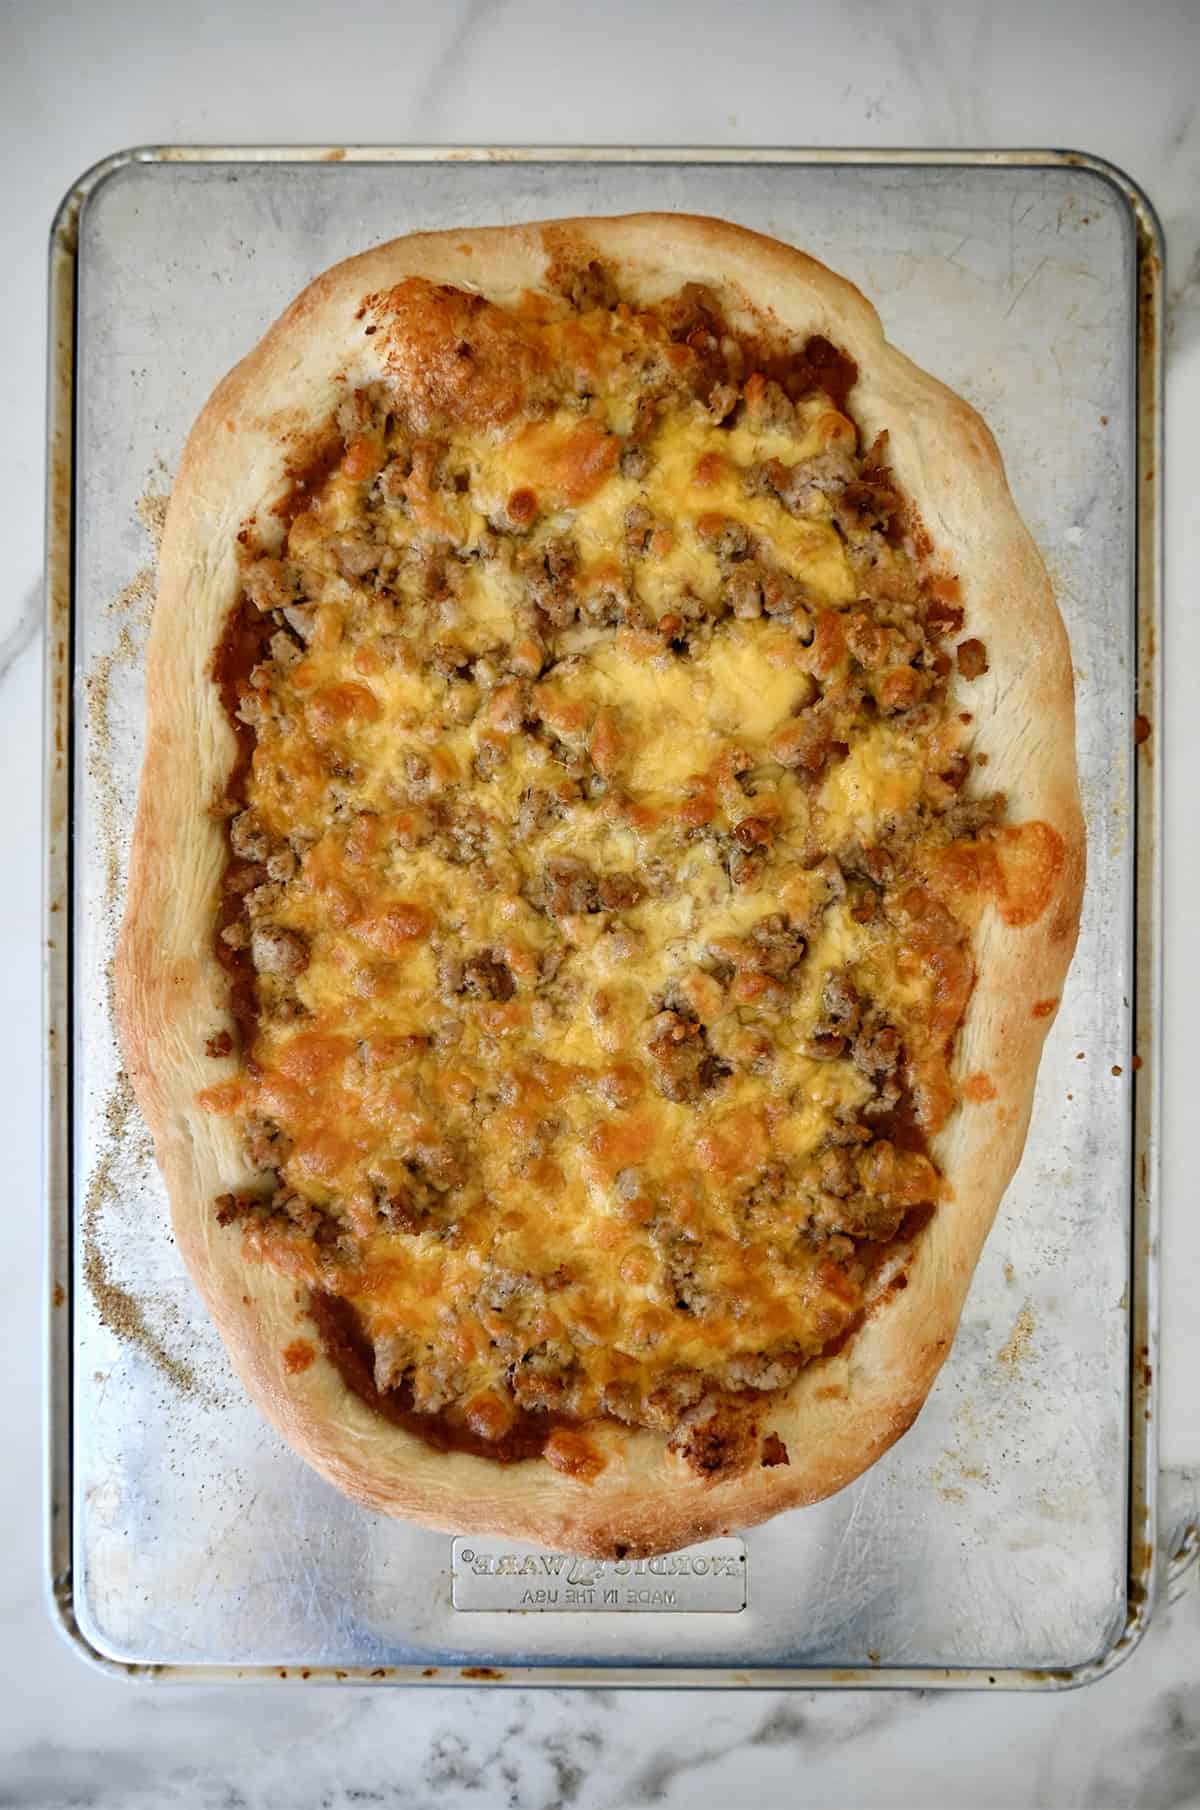 Freshly baked taco pizza without fresh toppings.